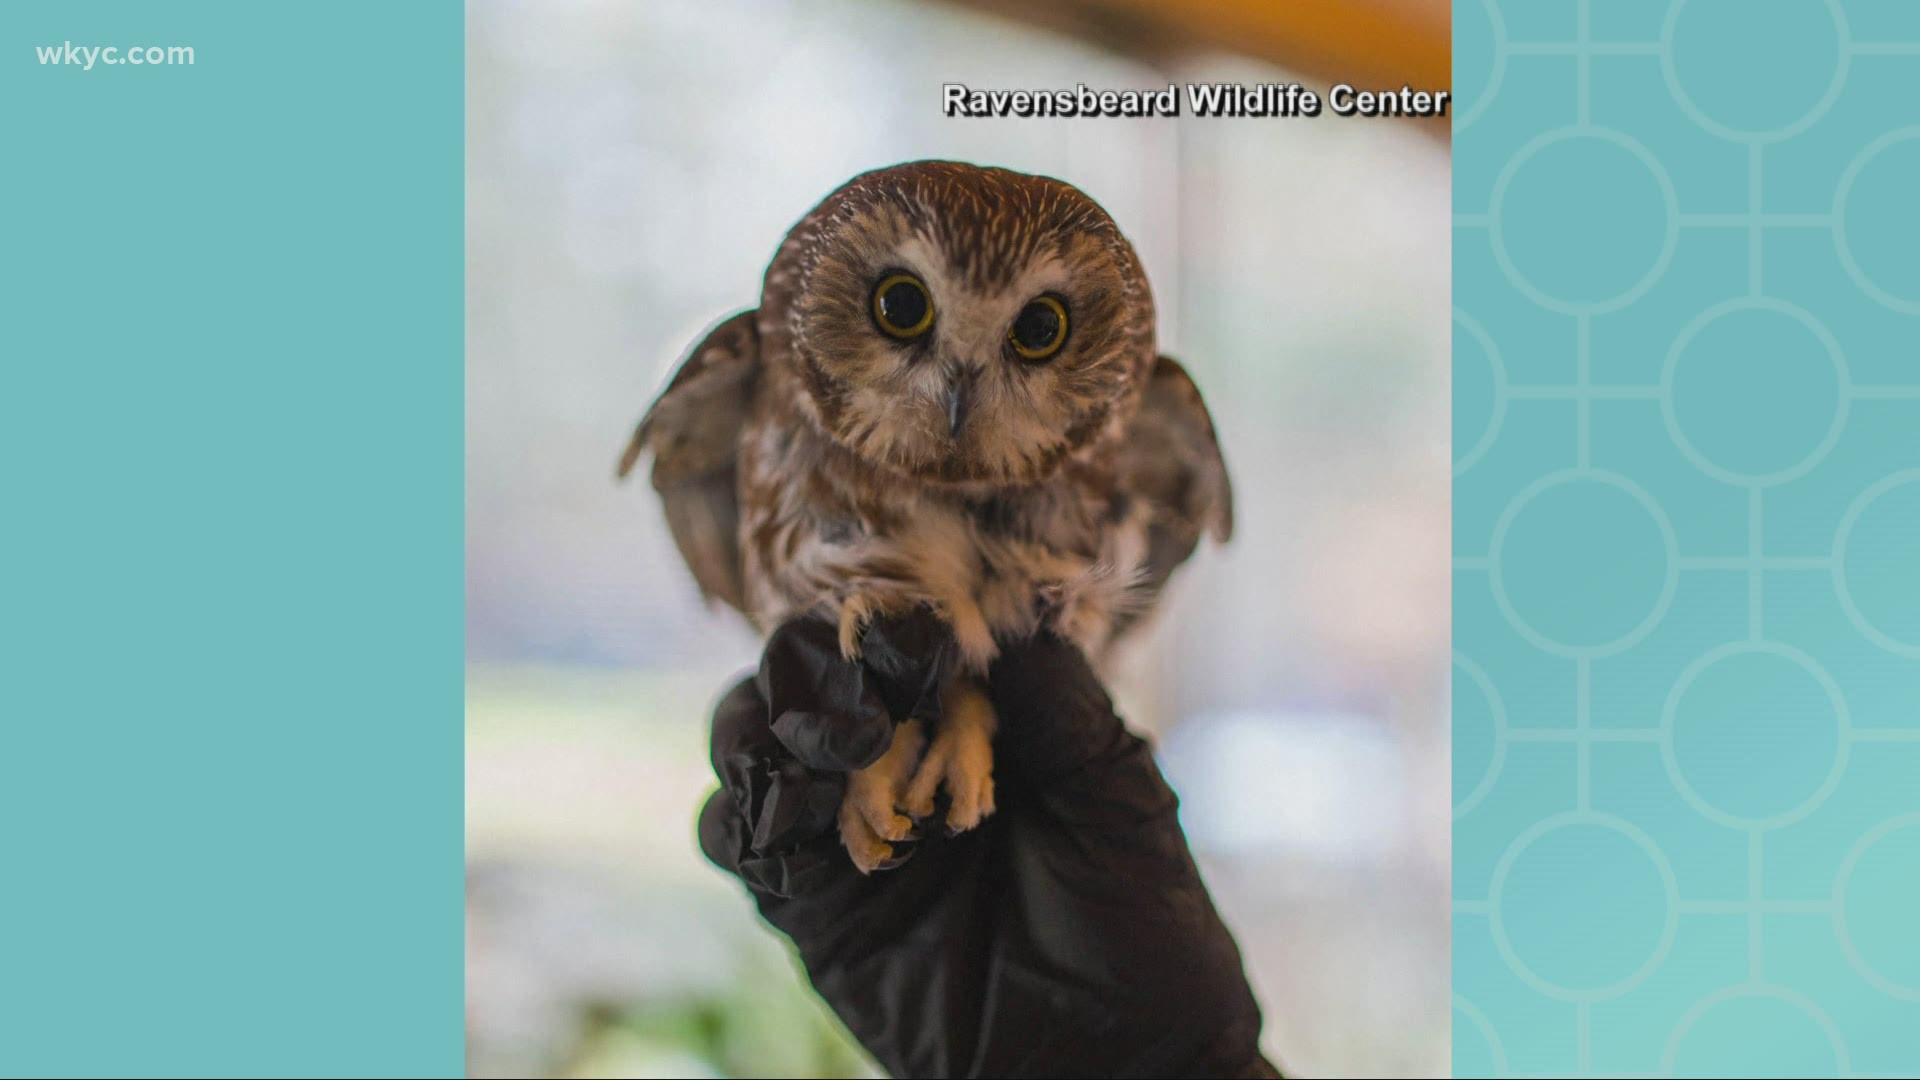 You may remember the owl that was found in the Rockefeller Christmas tree. She is finally home in the wild!